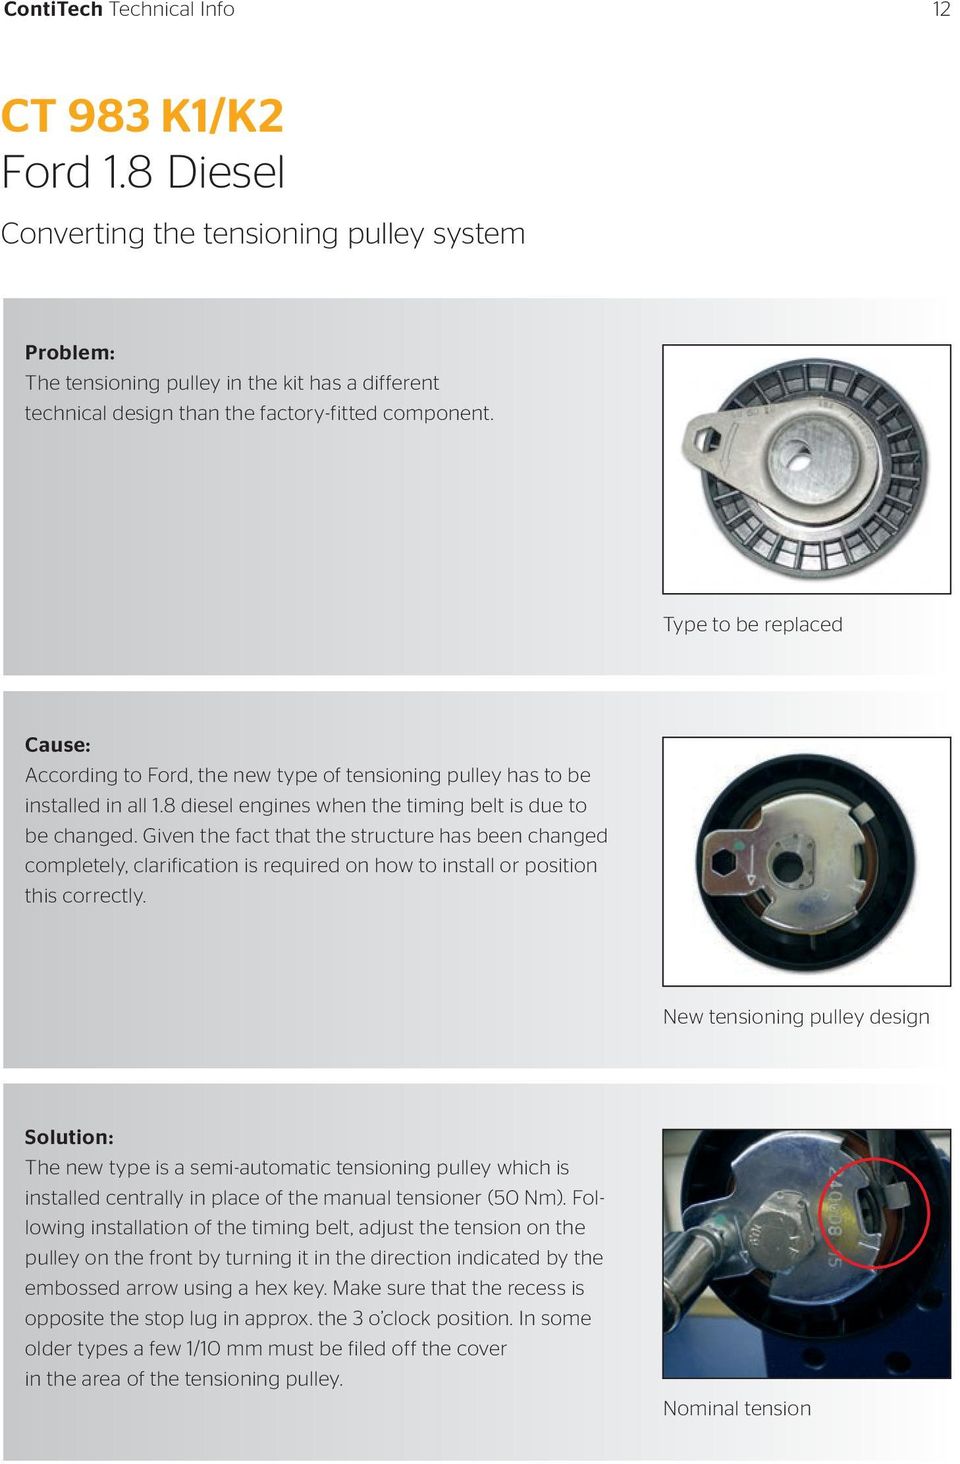 Type to be replaced Cause: According to Ford, the new type of tensioning pulley has to be installed in all 1.8 diesel engines when the timing belt is due to be changed.